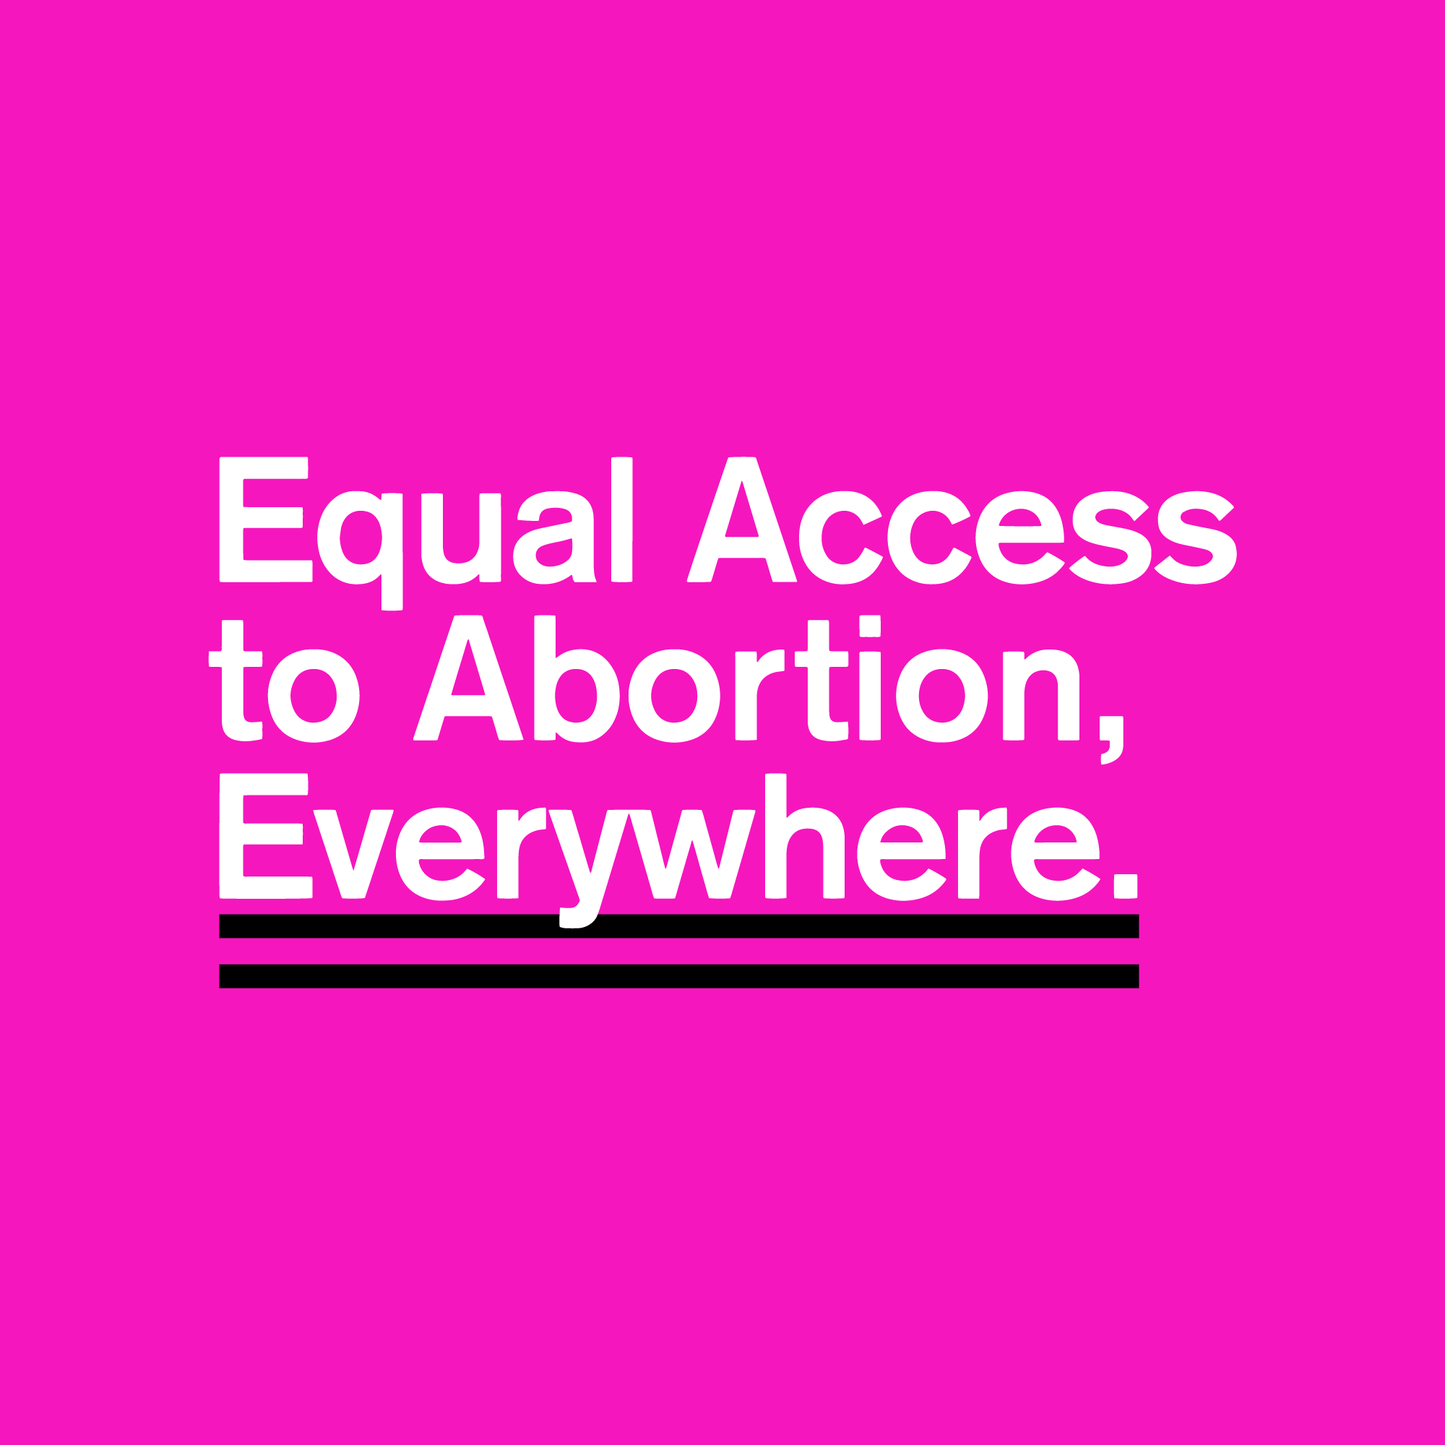 Donation to Equal Access to Abortion